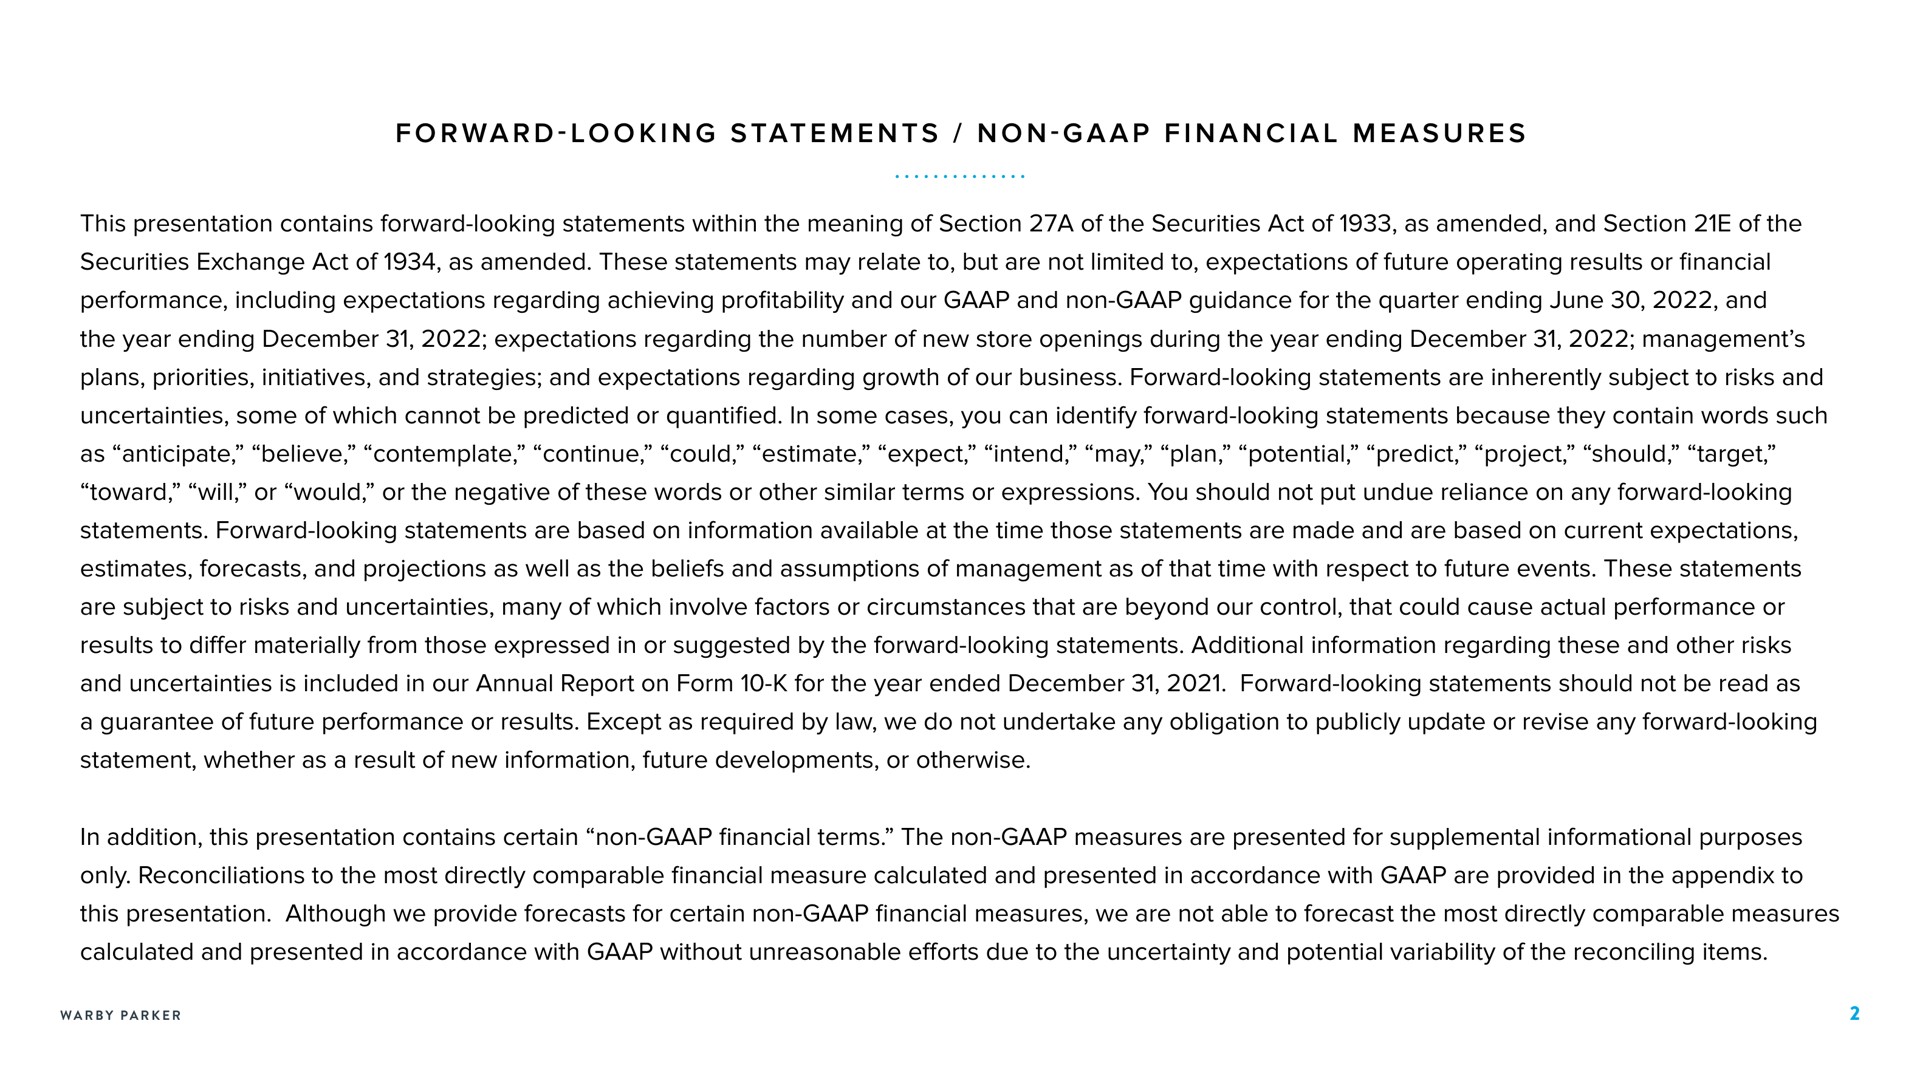 forward looking statements non financial measures this presentation contains forward looking statements within the meaning of section a of the securities act of as amended and section of the performance including expectations regarding achieving profitability and our and non guidance for the quarter ending june and the year ending expectations regarding the number of new store openings during the year ending management toward will or would or the negative of these words or other similar terms or expressions you should not put undue reliance on any forward looking statements forward looking statements are based on information available at the time those statements are made and are based on current expectations results to differ materially from those expressed in or suggested by the forward looking statements additional information regarding these and other risks and uncertainties is included in our annual report on form for the year ended forward looking statements should not be read as in addition this presentation contains certain non financial terms the non measures are presented for supplemental informational purposes this presentation although we provide forecasts for certain non financial measures we are not able to forecast the most directly comparable measures calculated and presented in accordance with without unreasonable efforts due to the uncertainty and potential variability of the reconciling items | Warby Parker